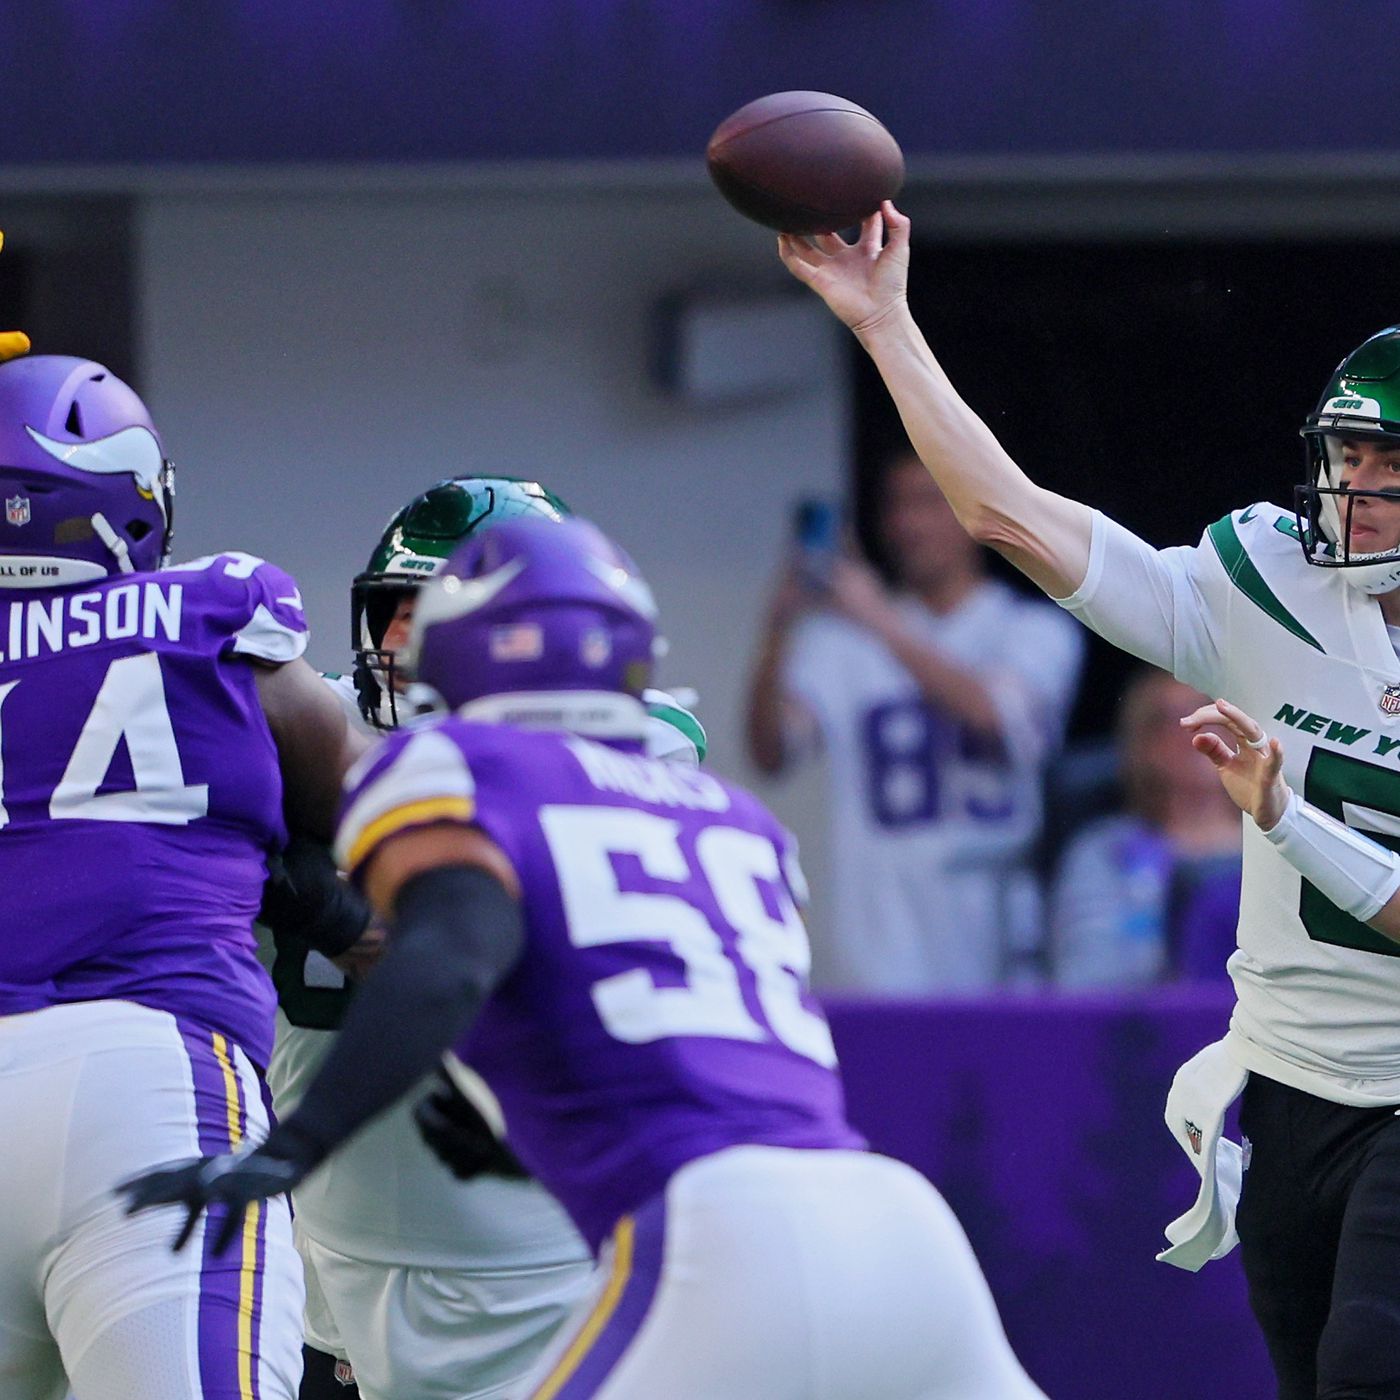 Worst first half for NY Jets since Week 3 as they trail Vikings, 20-6